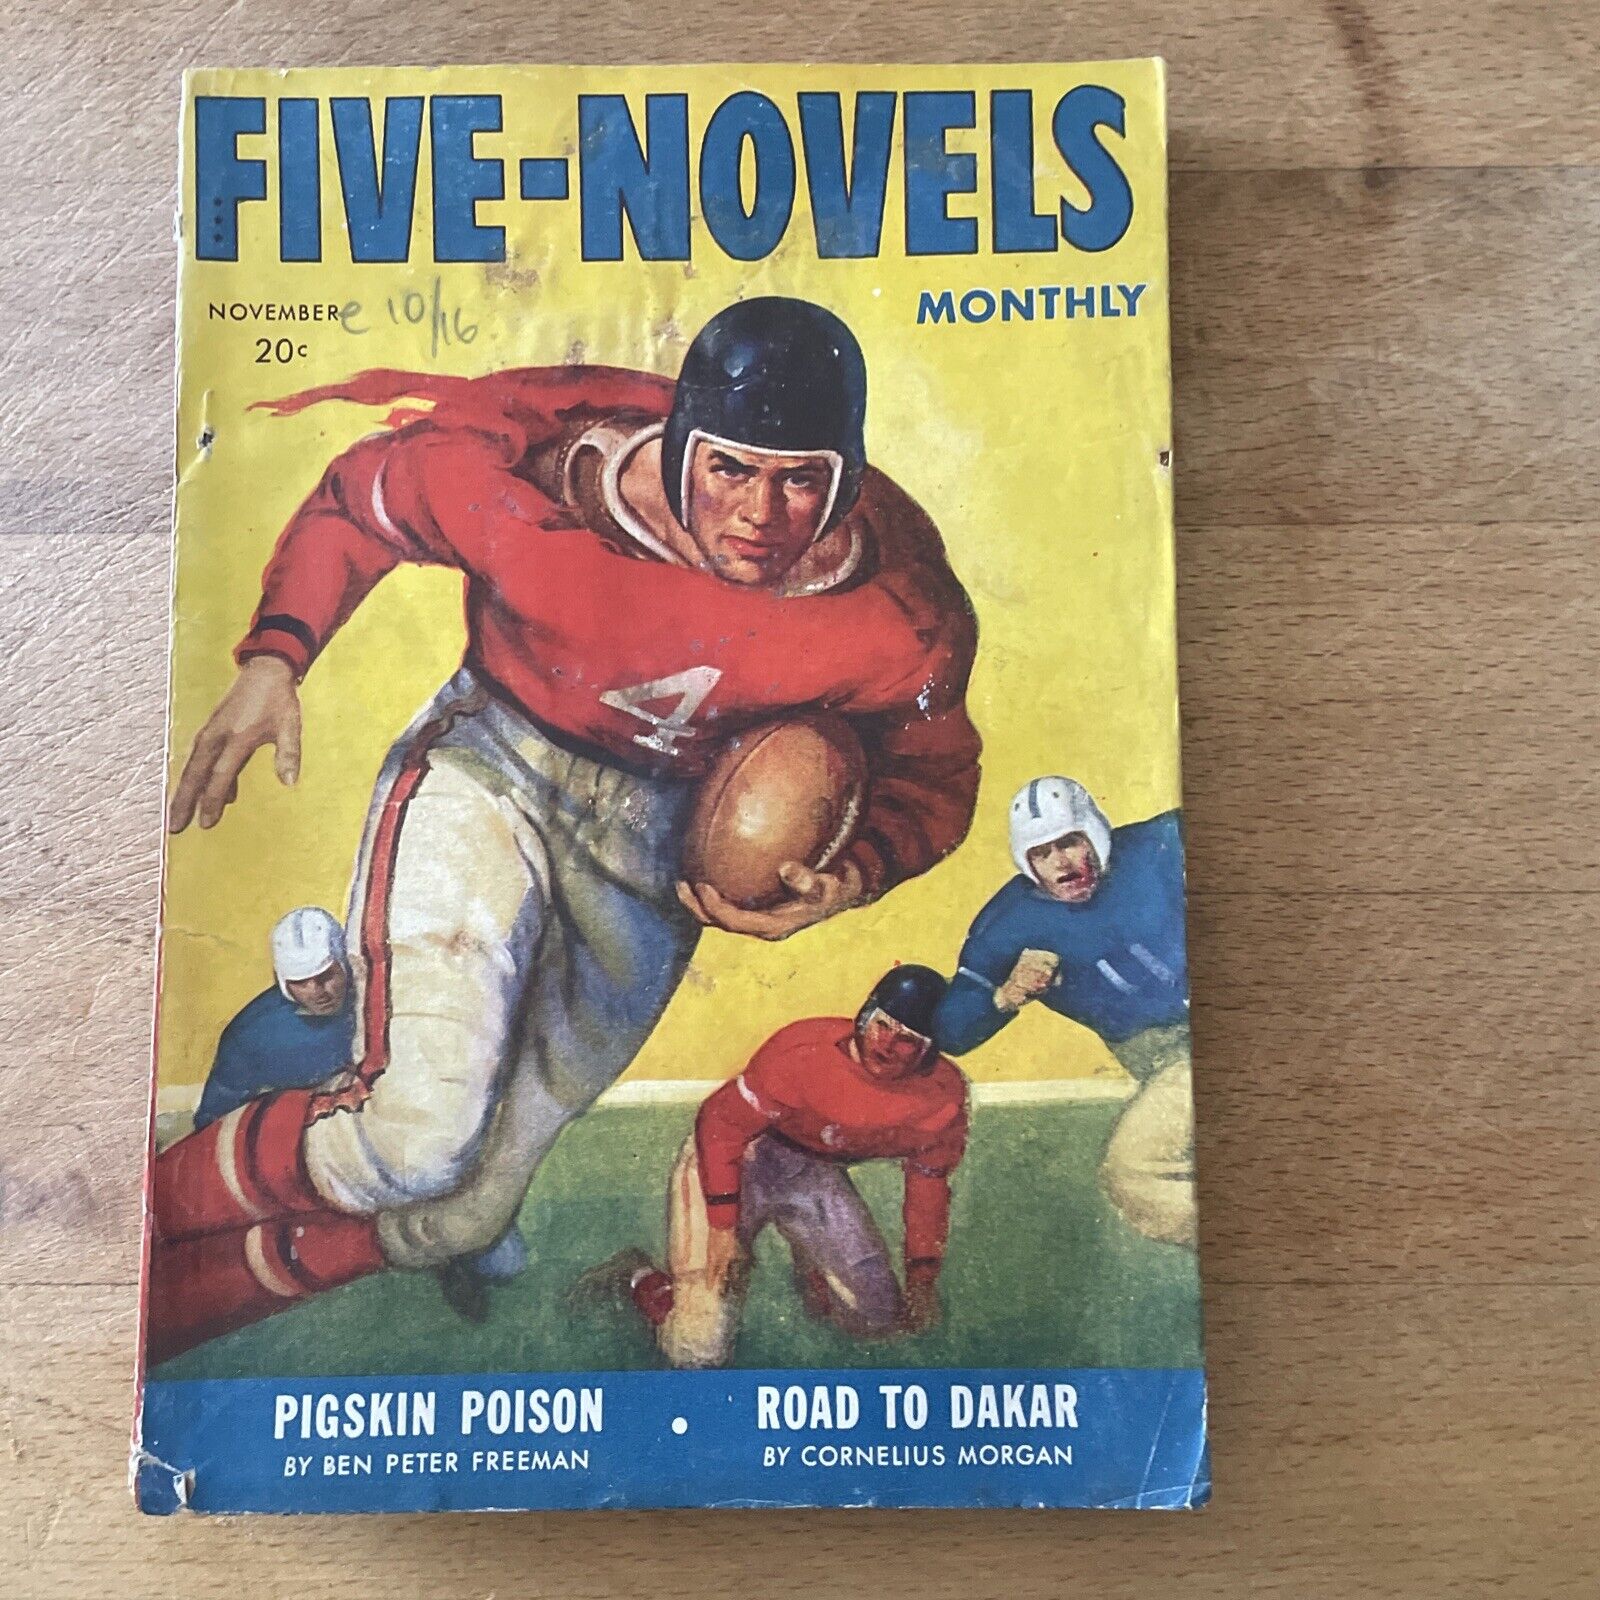 Five-novels Monthly